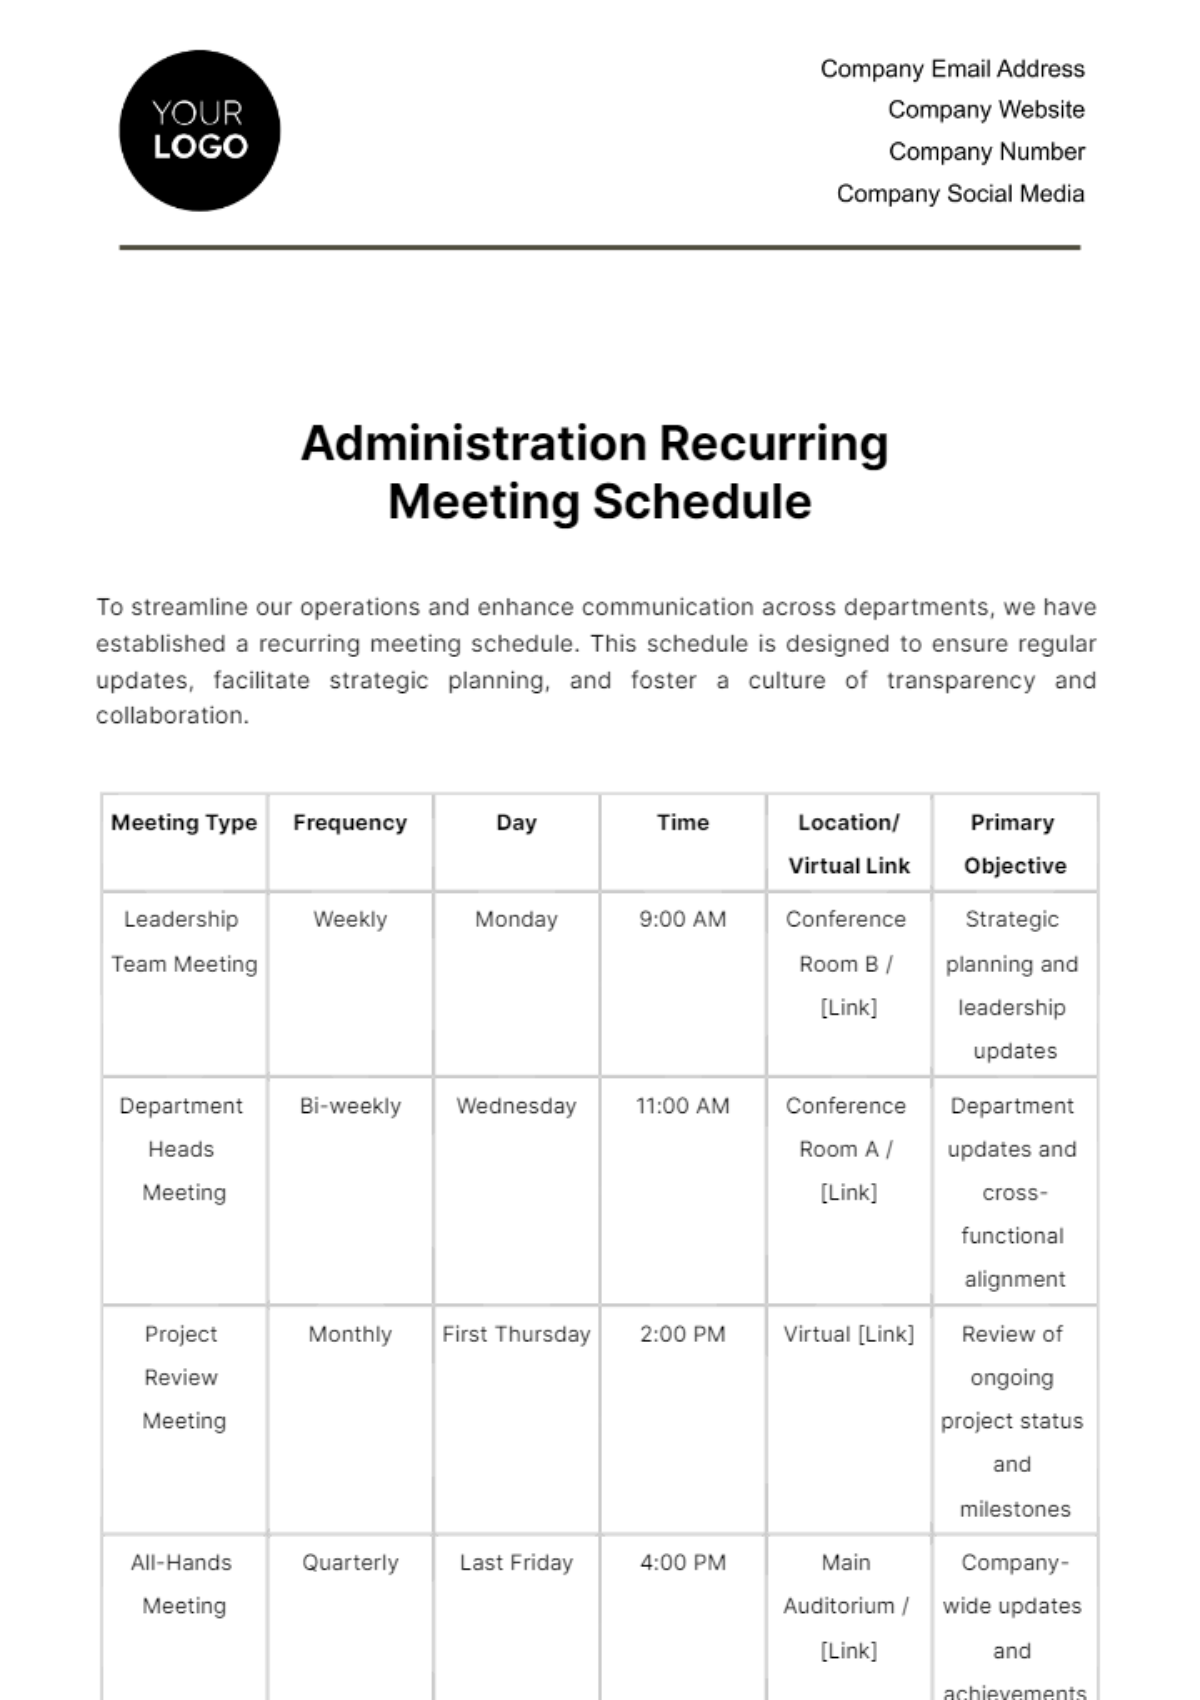 Free Administration Recurring Meeting Schedule Template